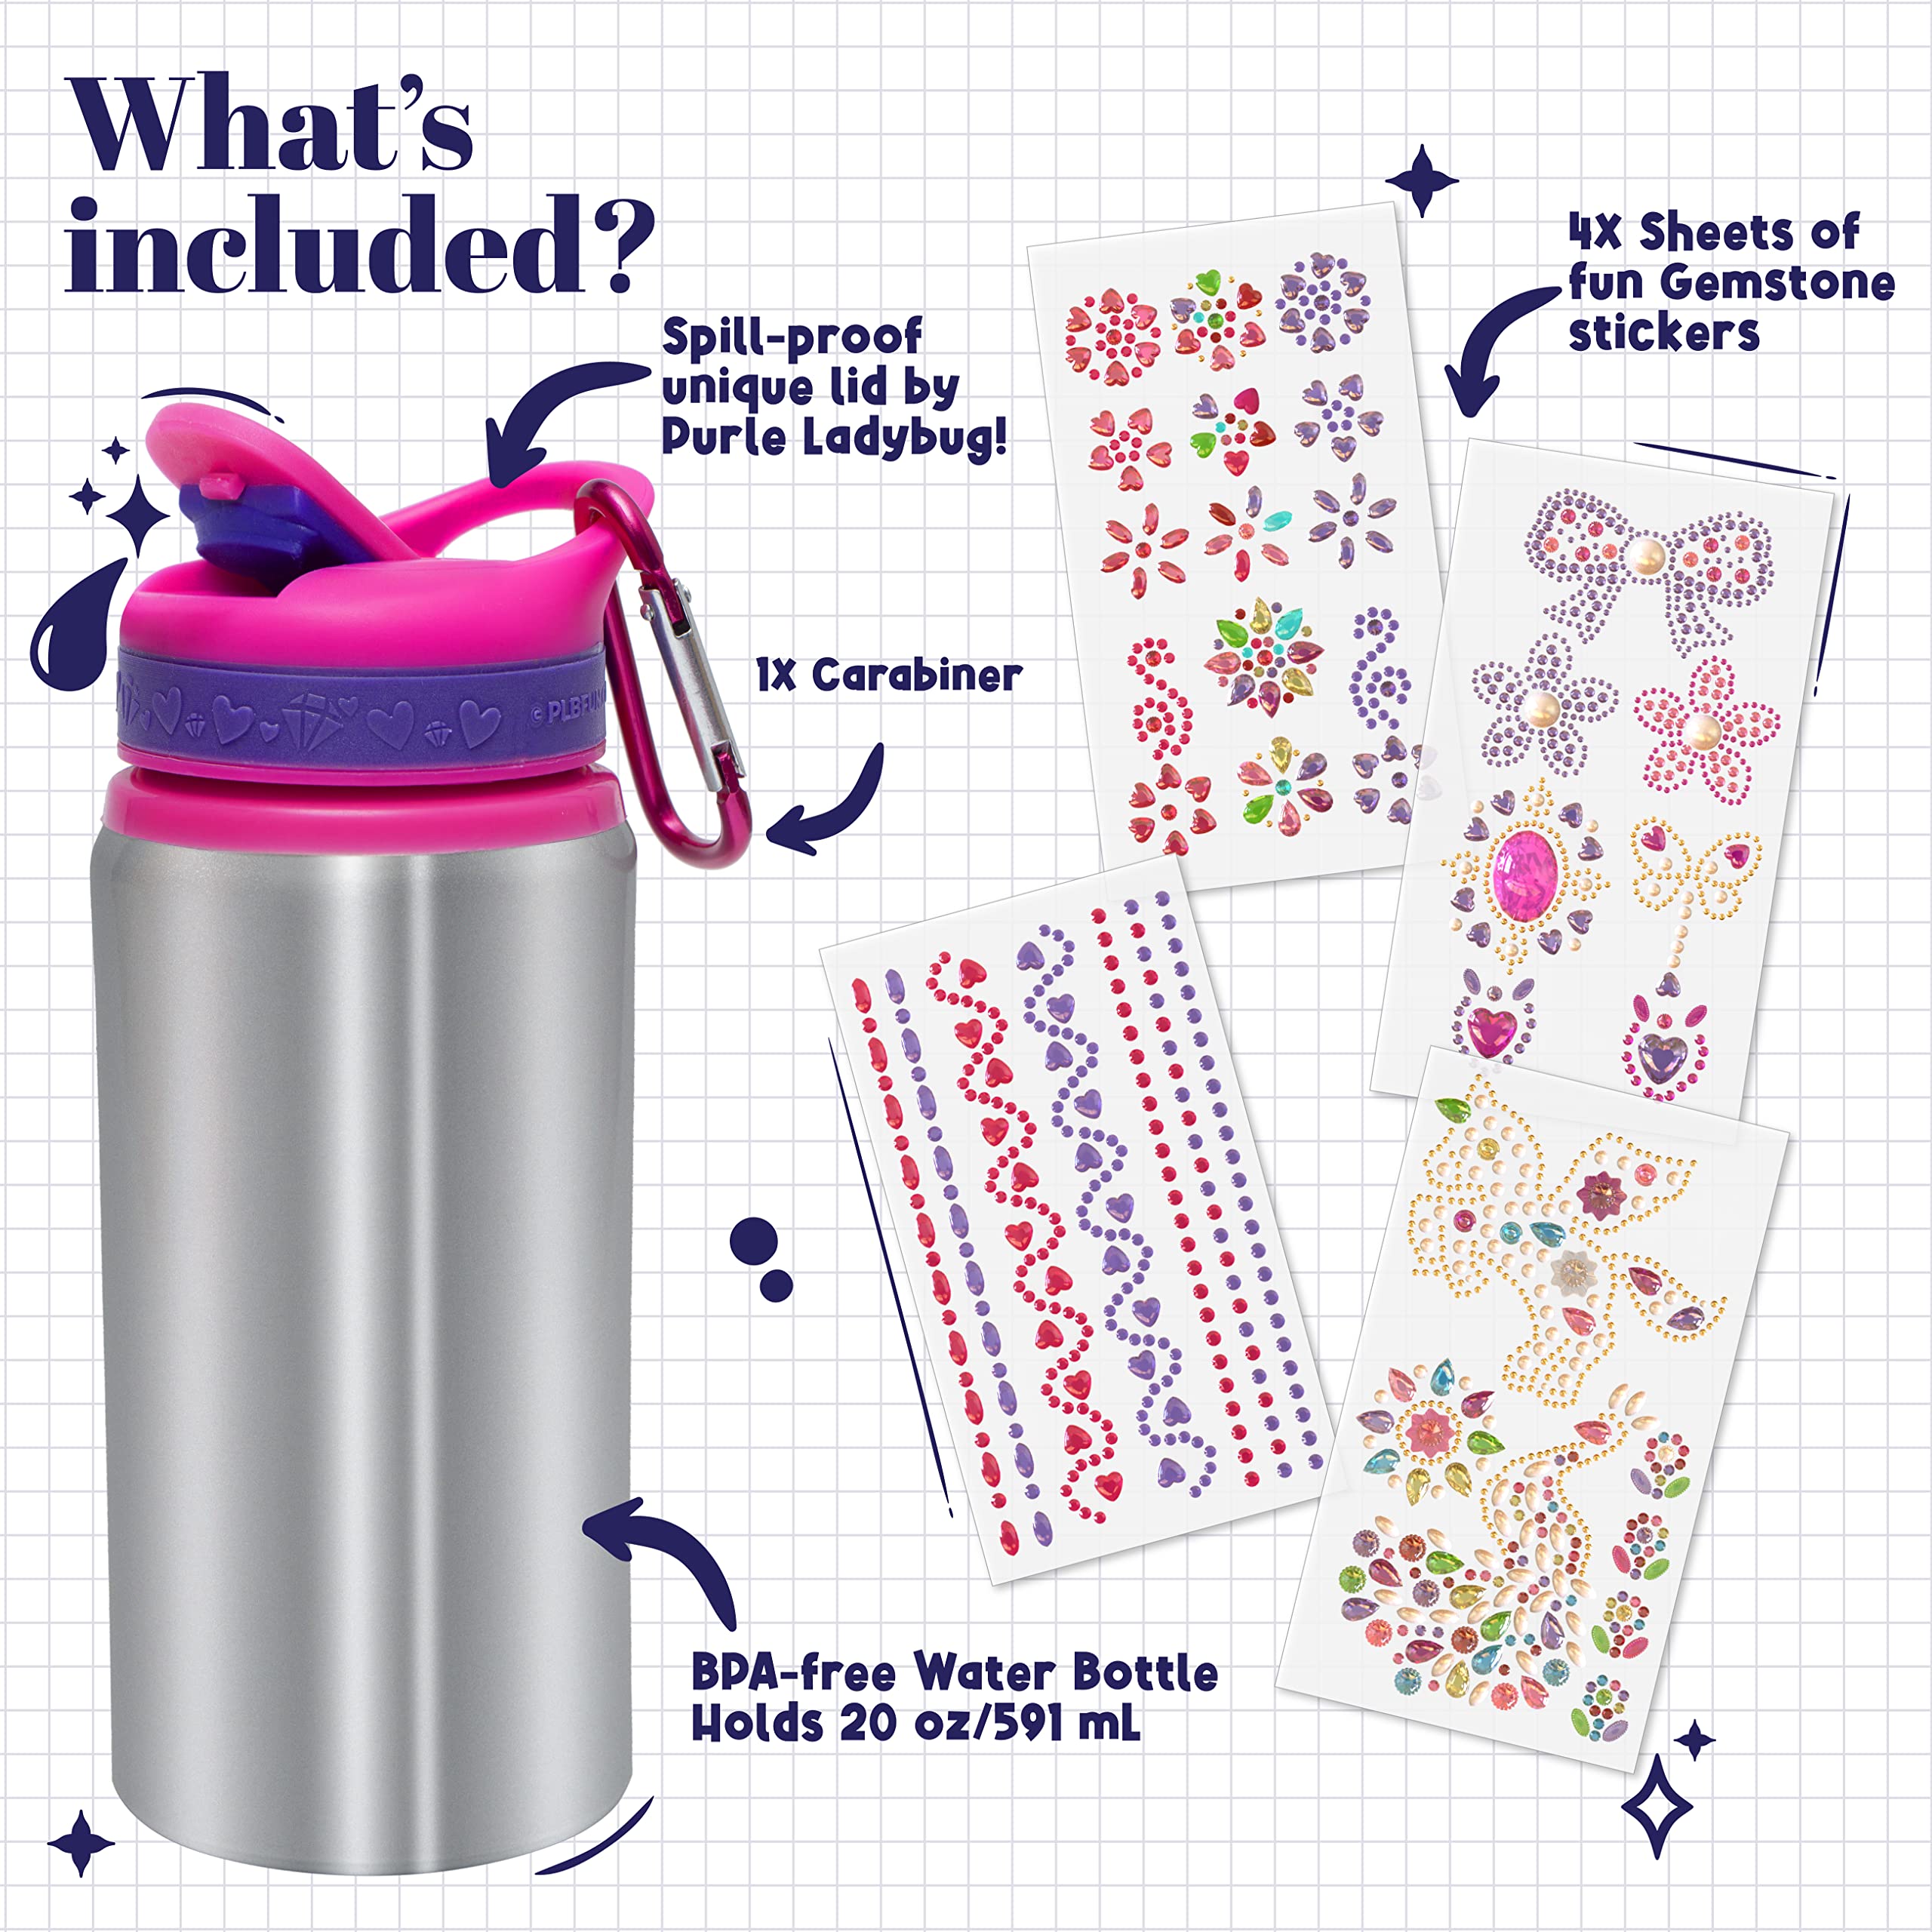 Purple Ladybug Decorate Your Own Water Bottle for Girls Age 6-8 - Cool 6 Year Old Girl Gifts Idea, Gifts Age 6-8 Years Old - Arts and Crafts Kit for Girls Ages 8-12, Girls Crafts Ages 7-10